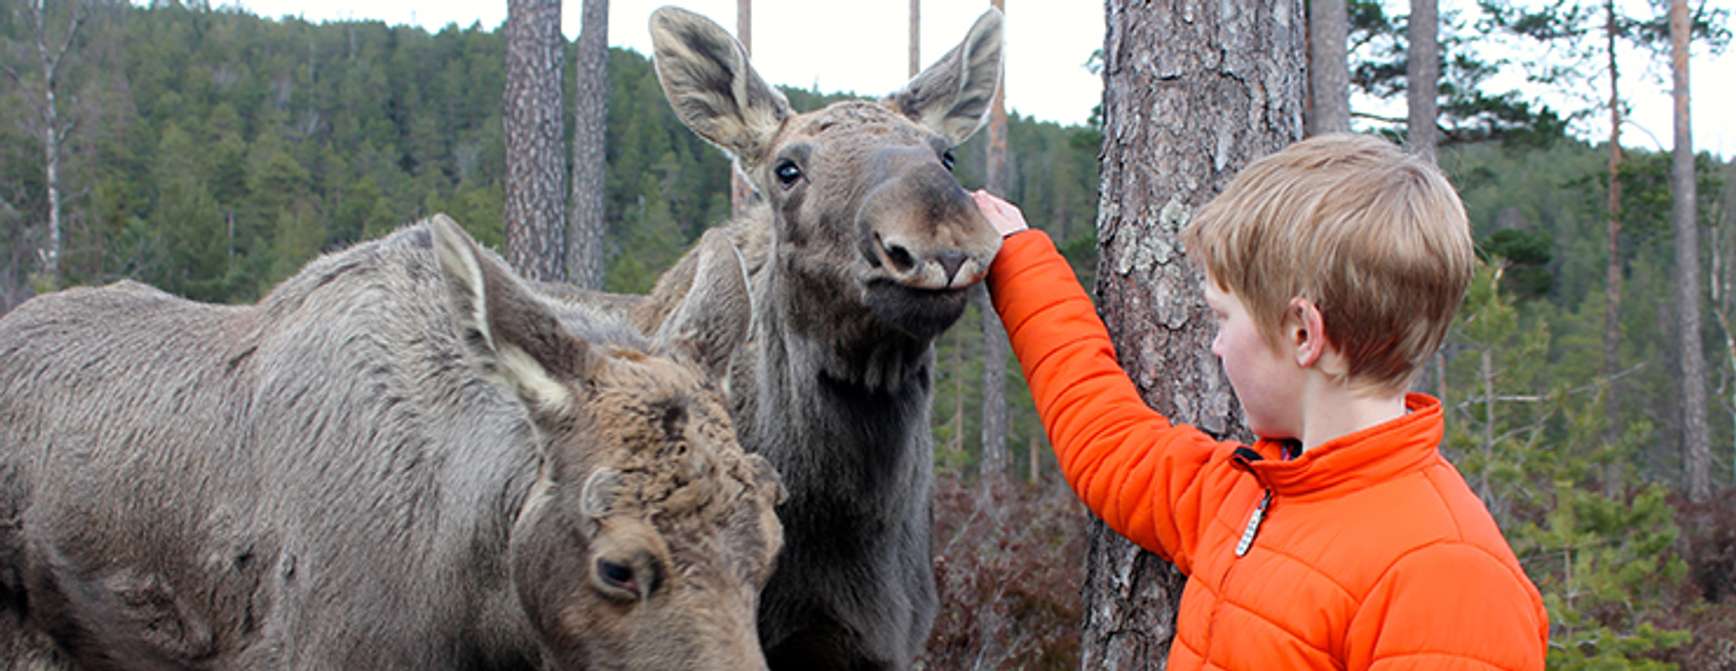 Boy standing with two moose and petting one of them